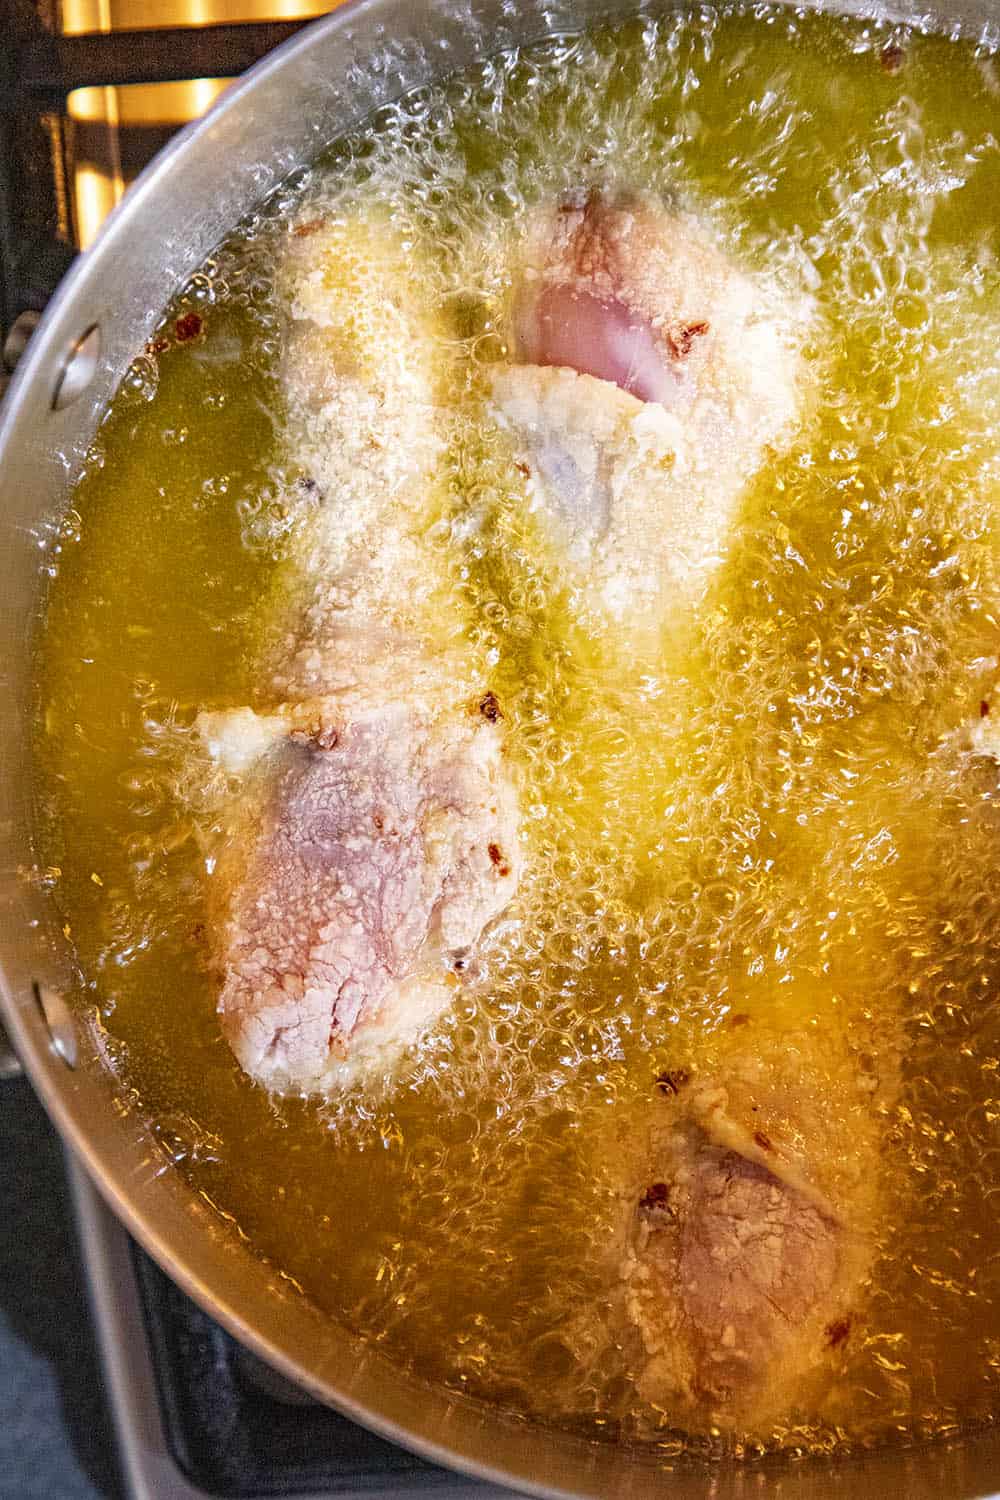 Frying the chicken in hot oil